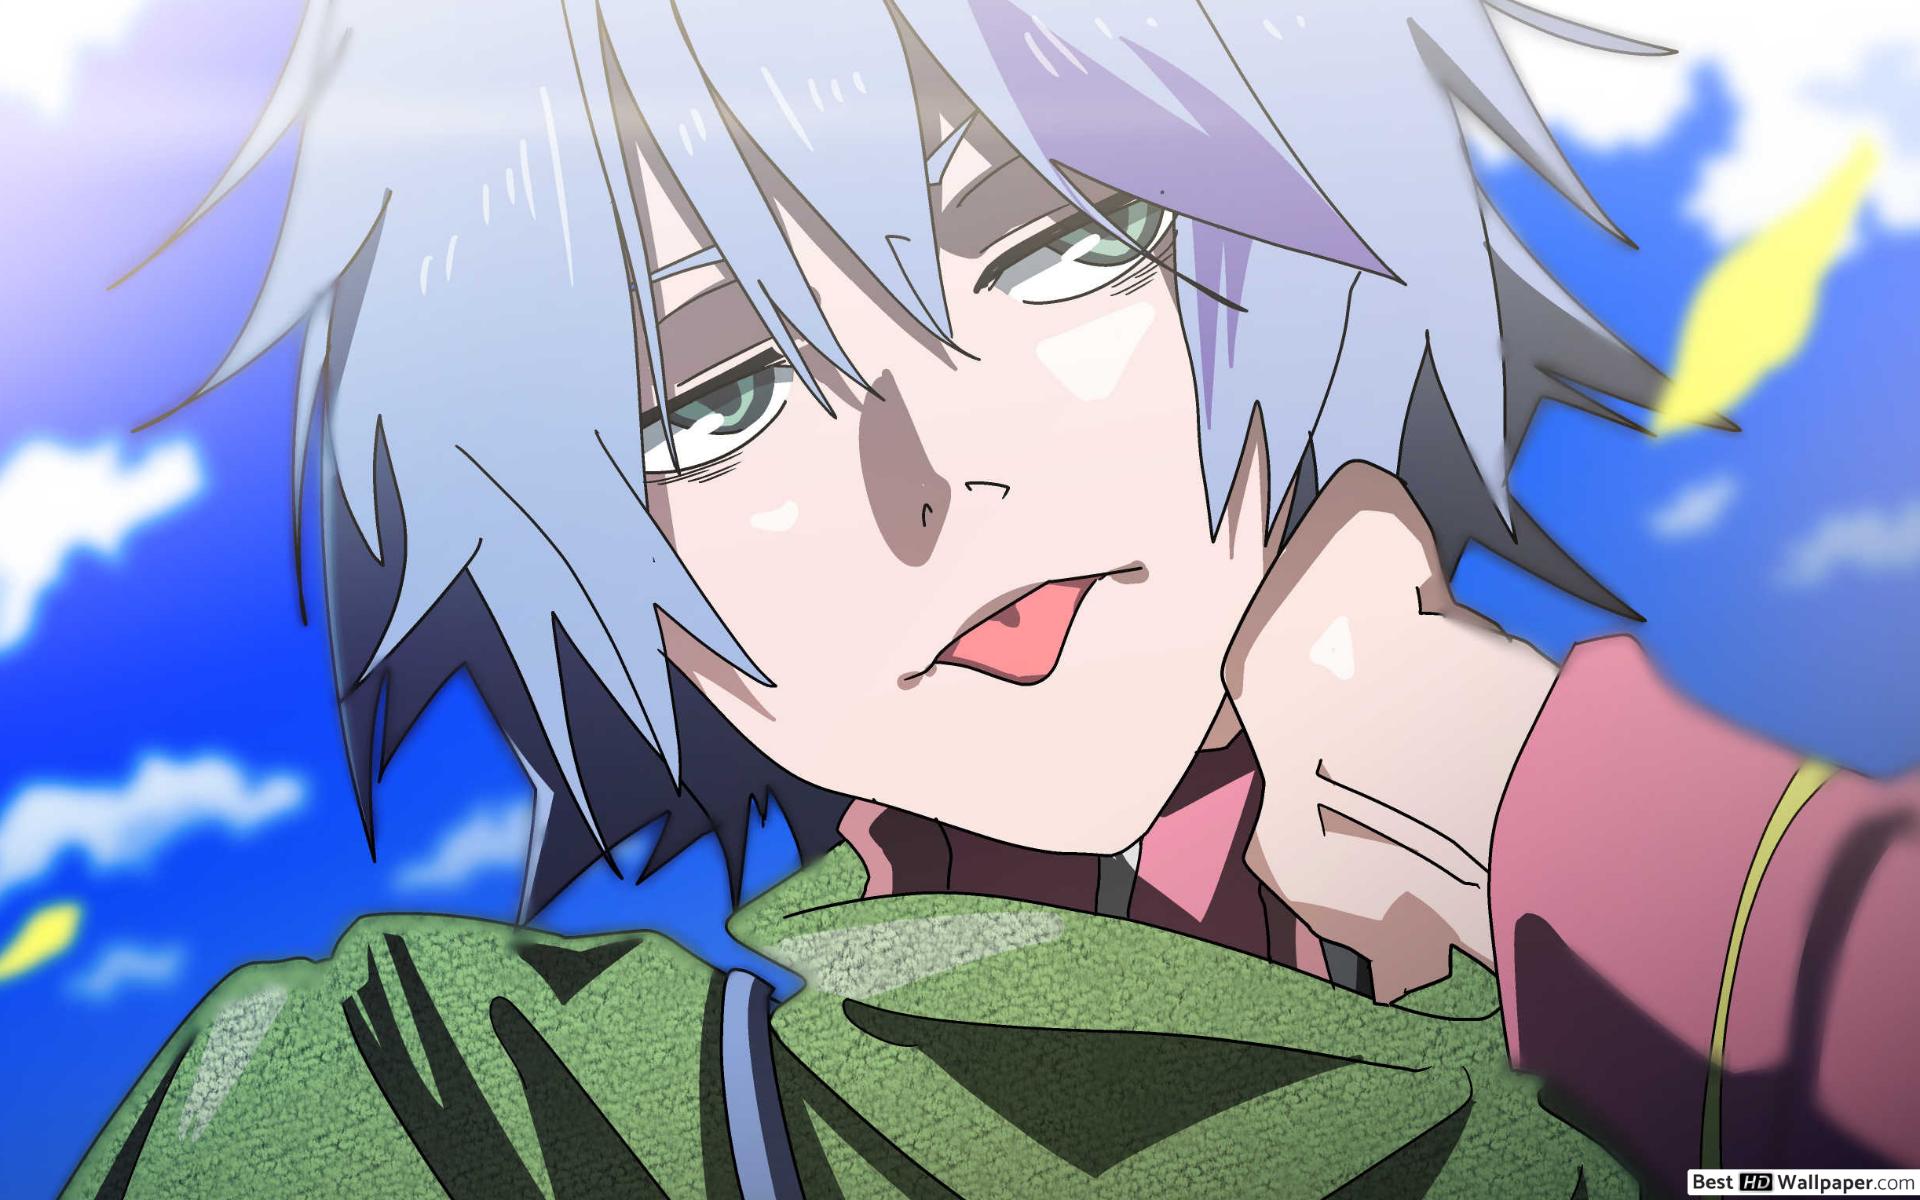 That Time I Got Reincarnated As A Slime HD wallpaper download